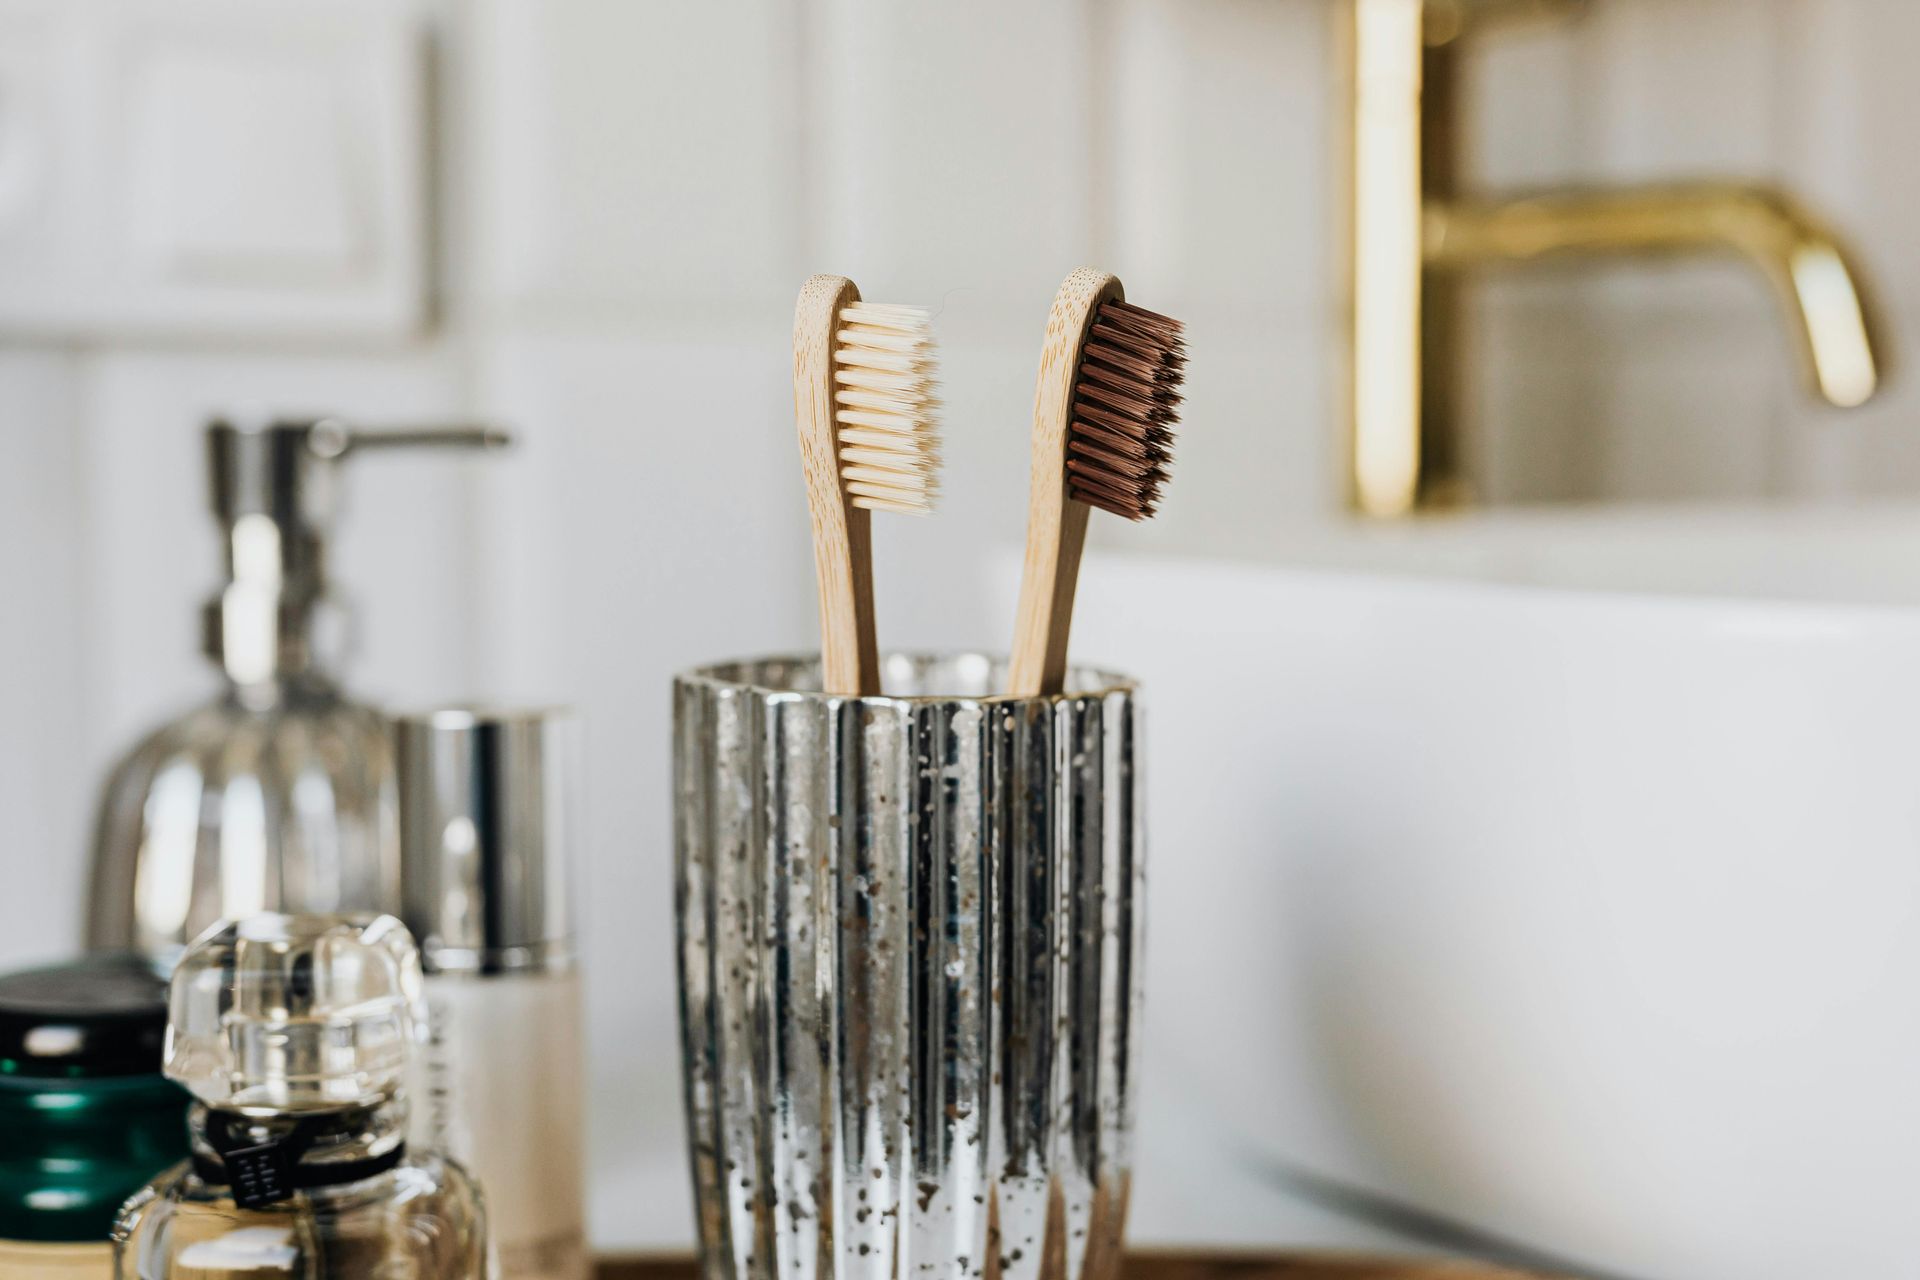 Two wooden toothbrushes are sitting in a glass in a bathroom.